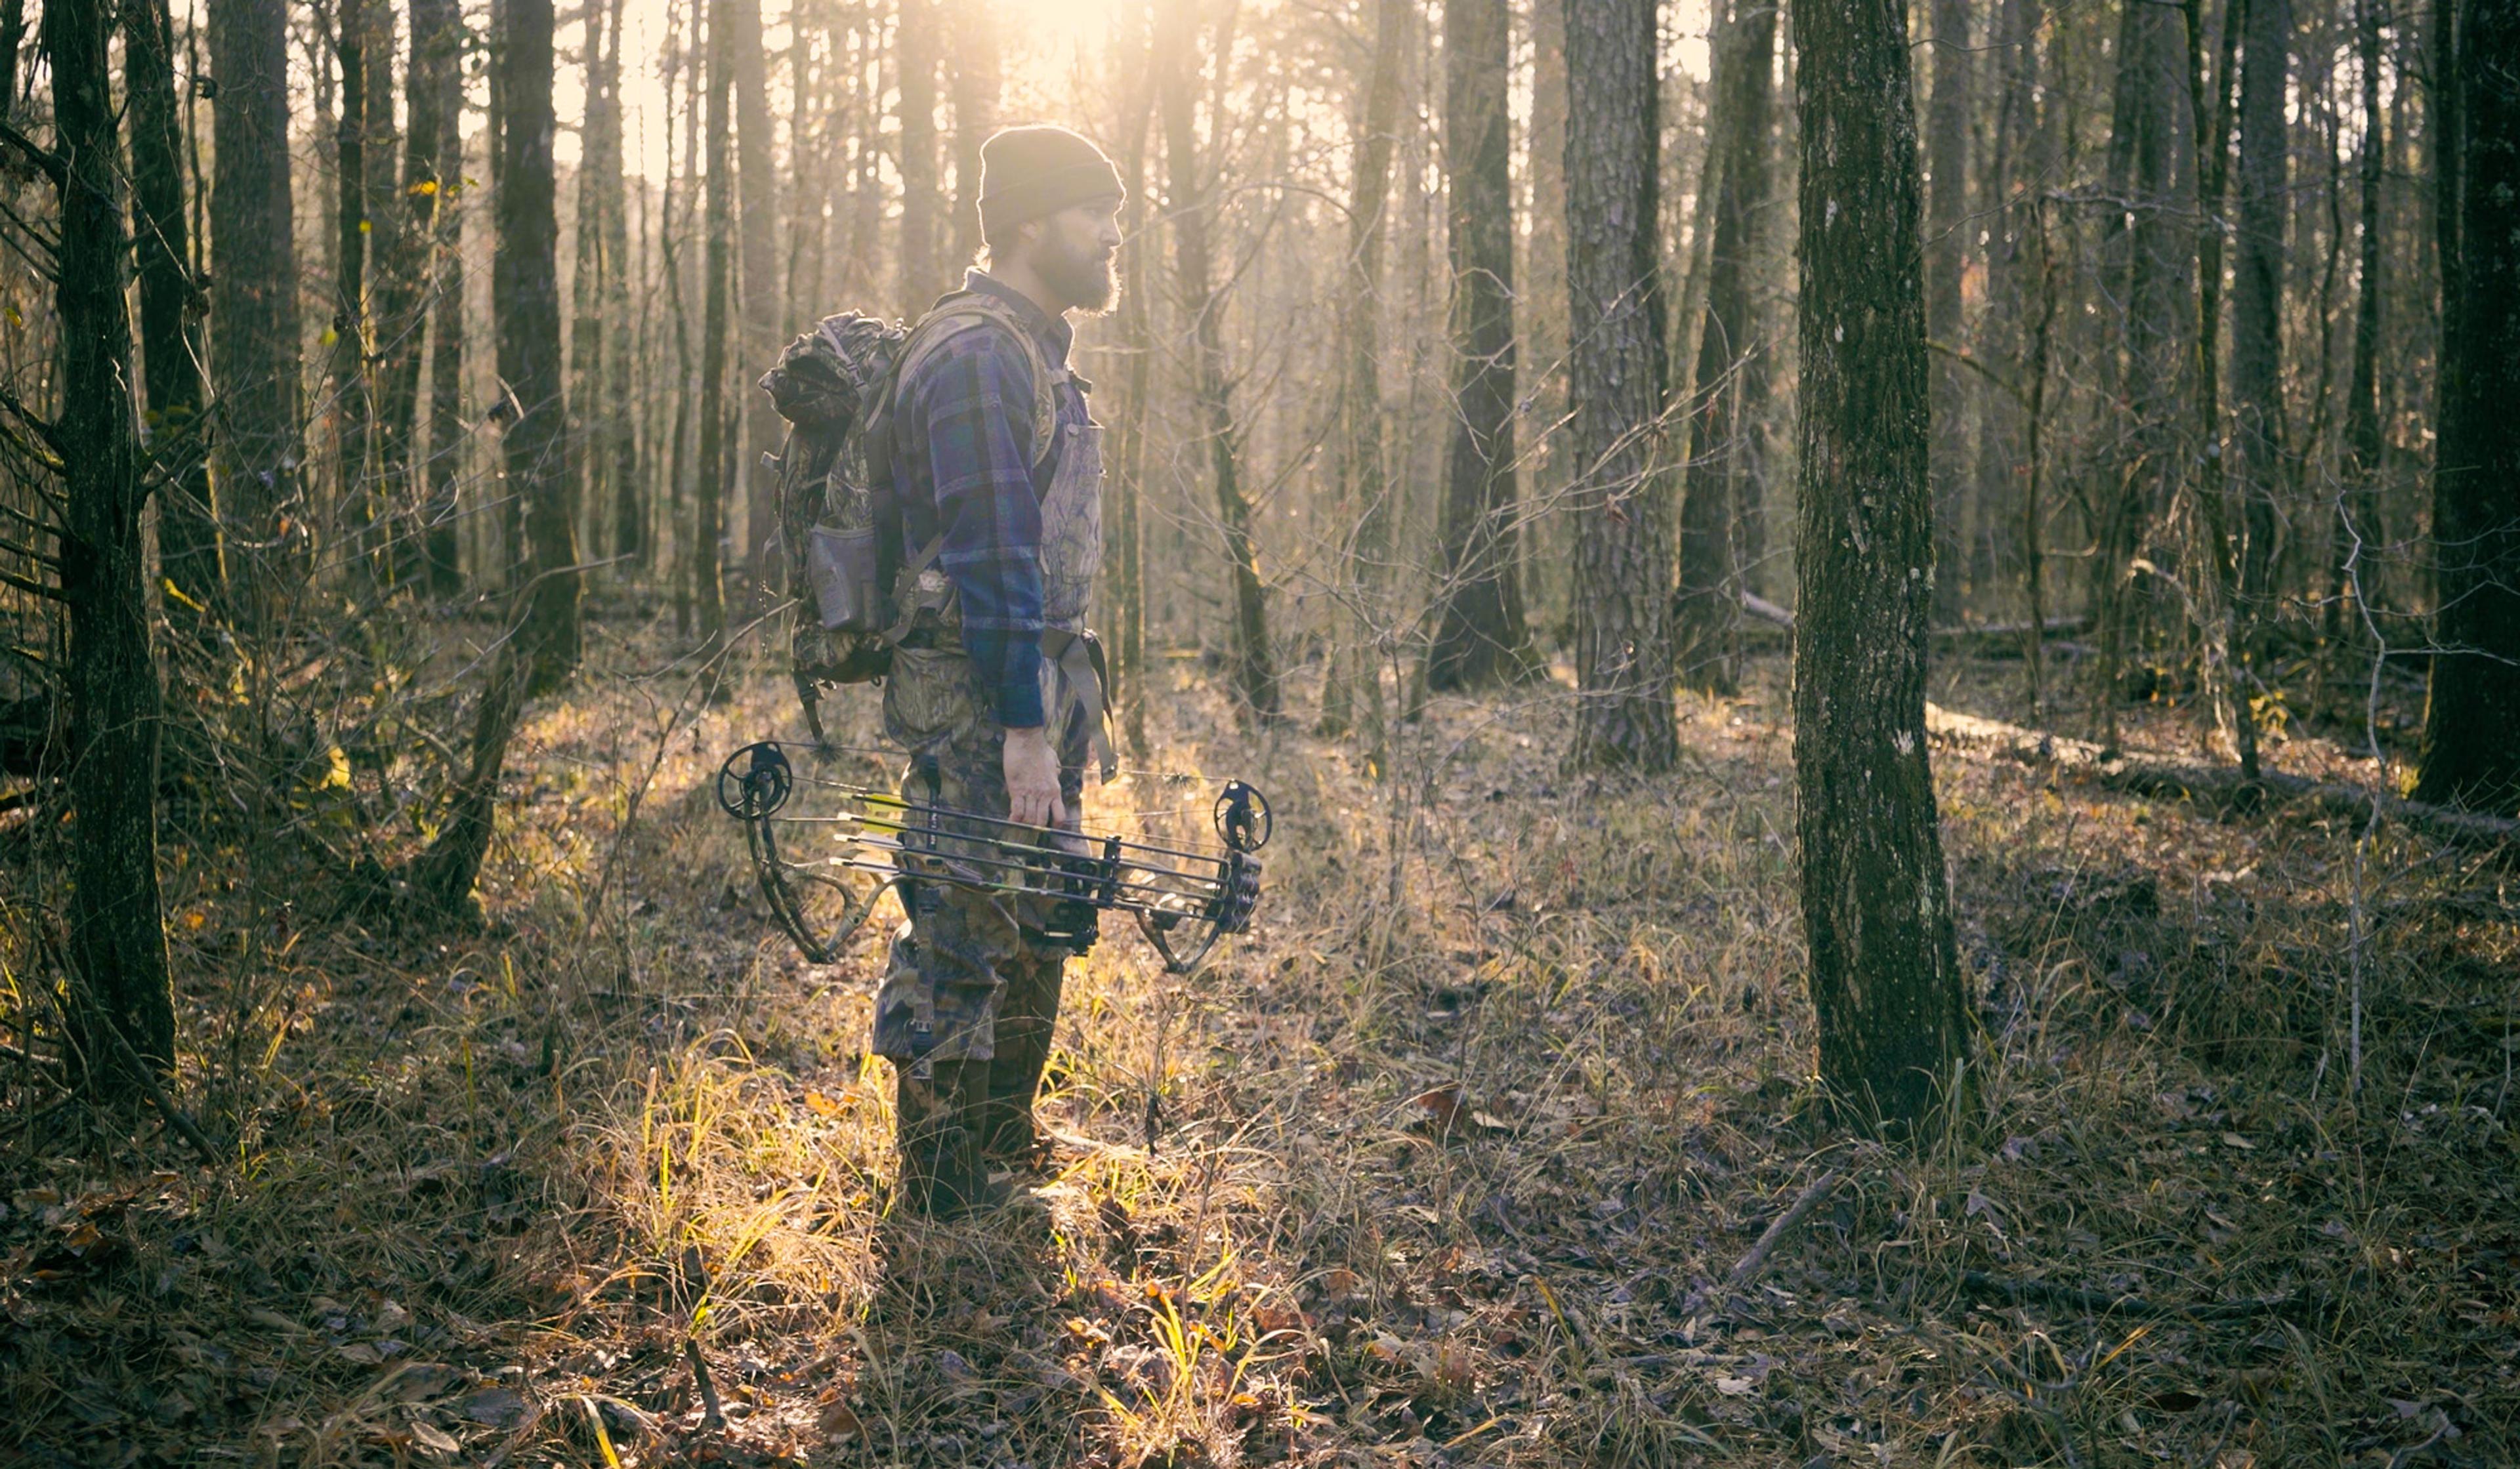 A person stands in a sunlit forest, holding a compound bow, and wearing outdoor gear with a backpack.